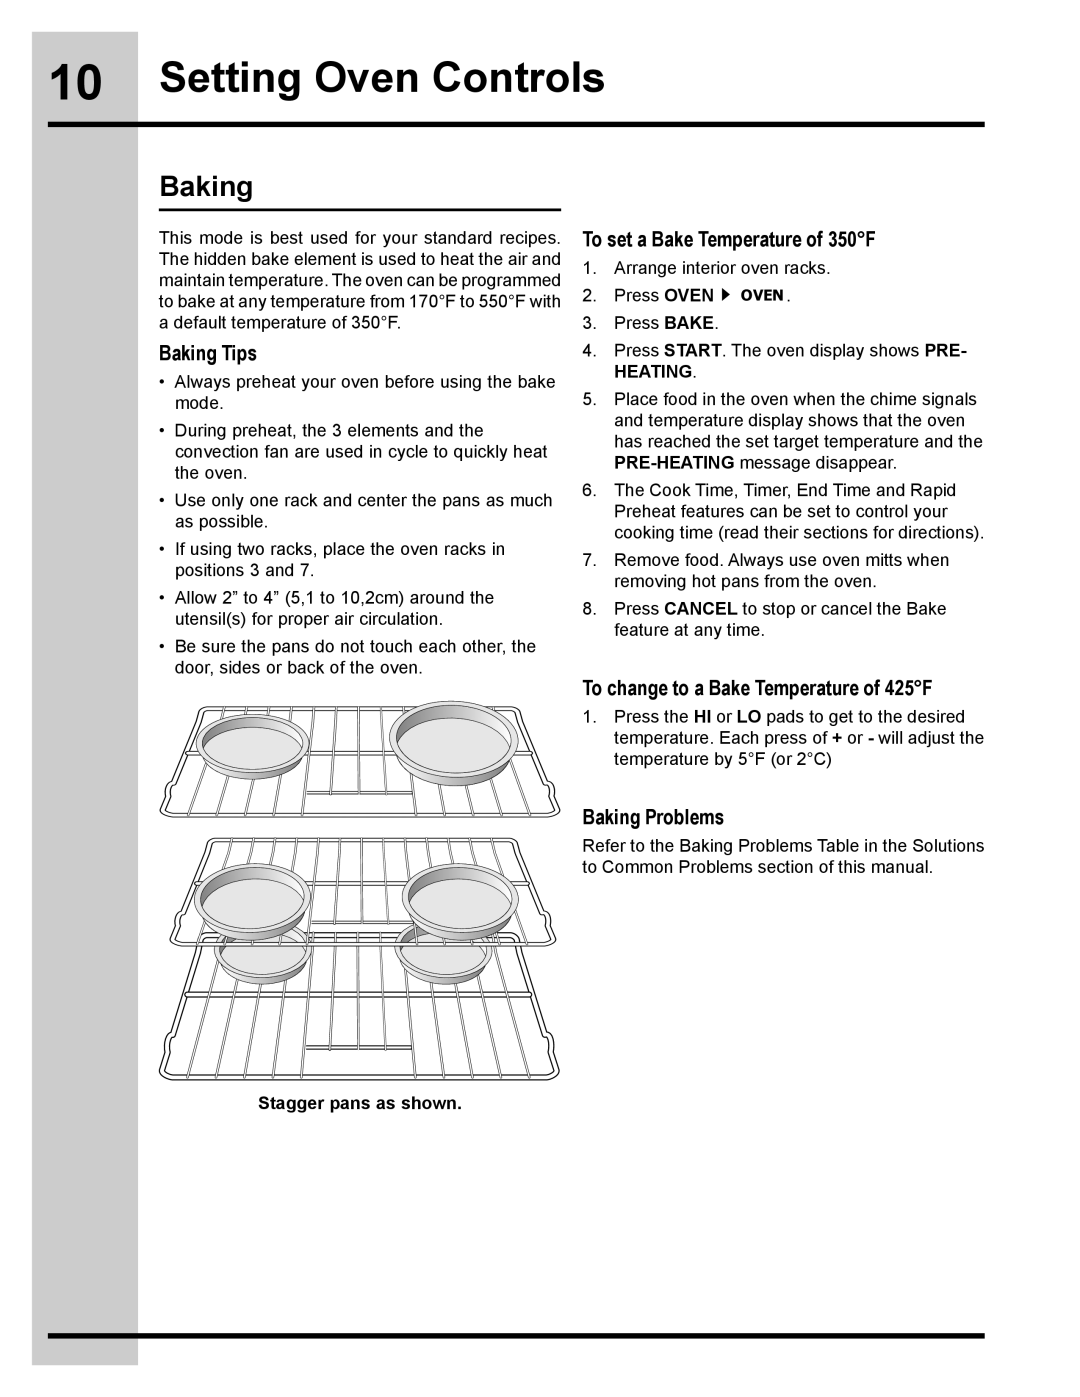 Electrolux 318205134 Setting Oven Controls, Baking Tips, To set a Bake Temperature of 350F, Baking Problems, Heating 